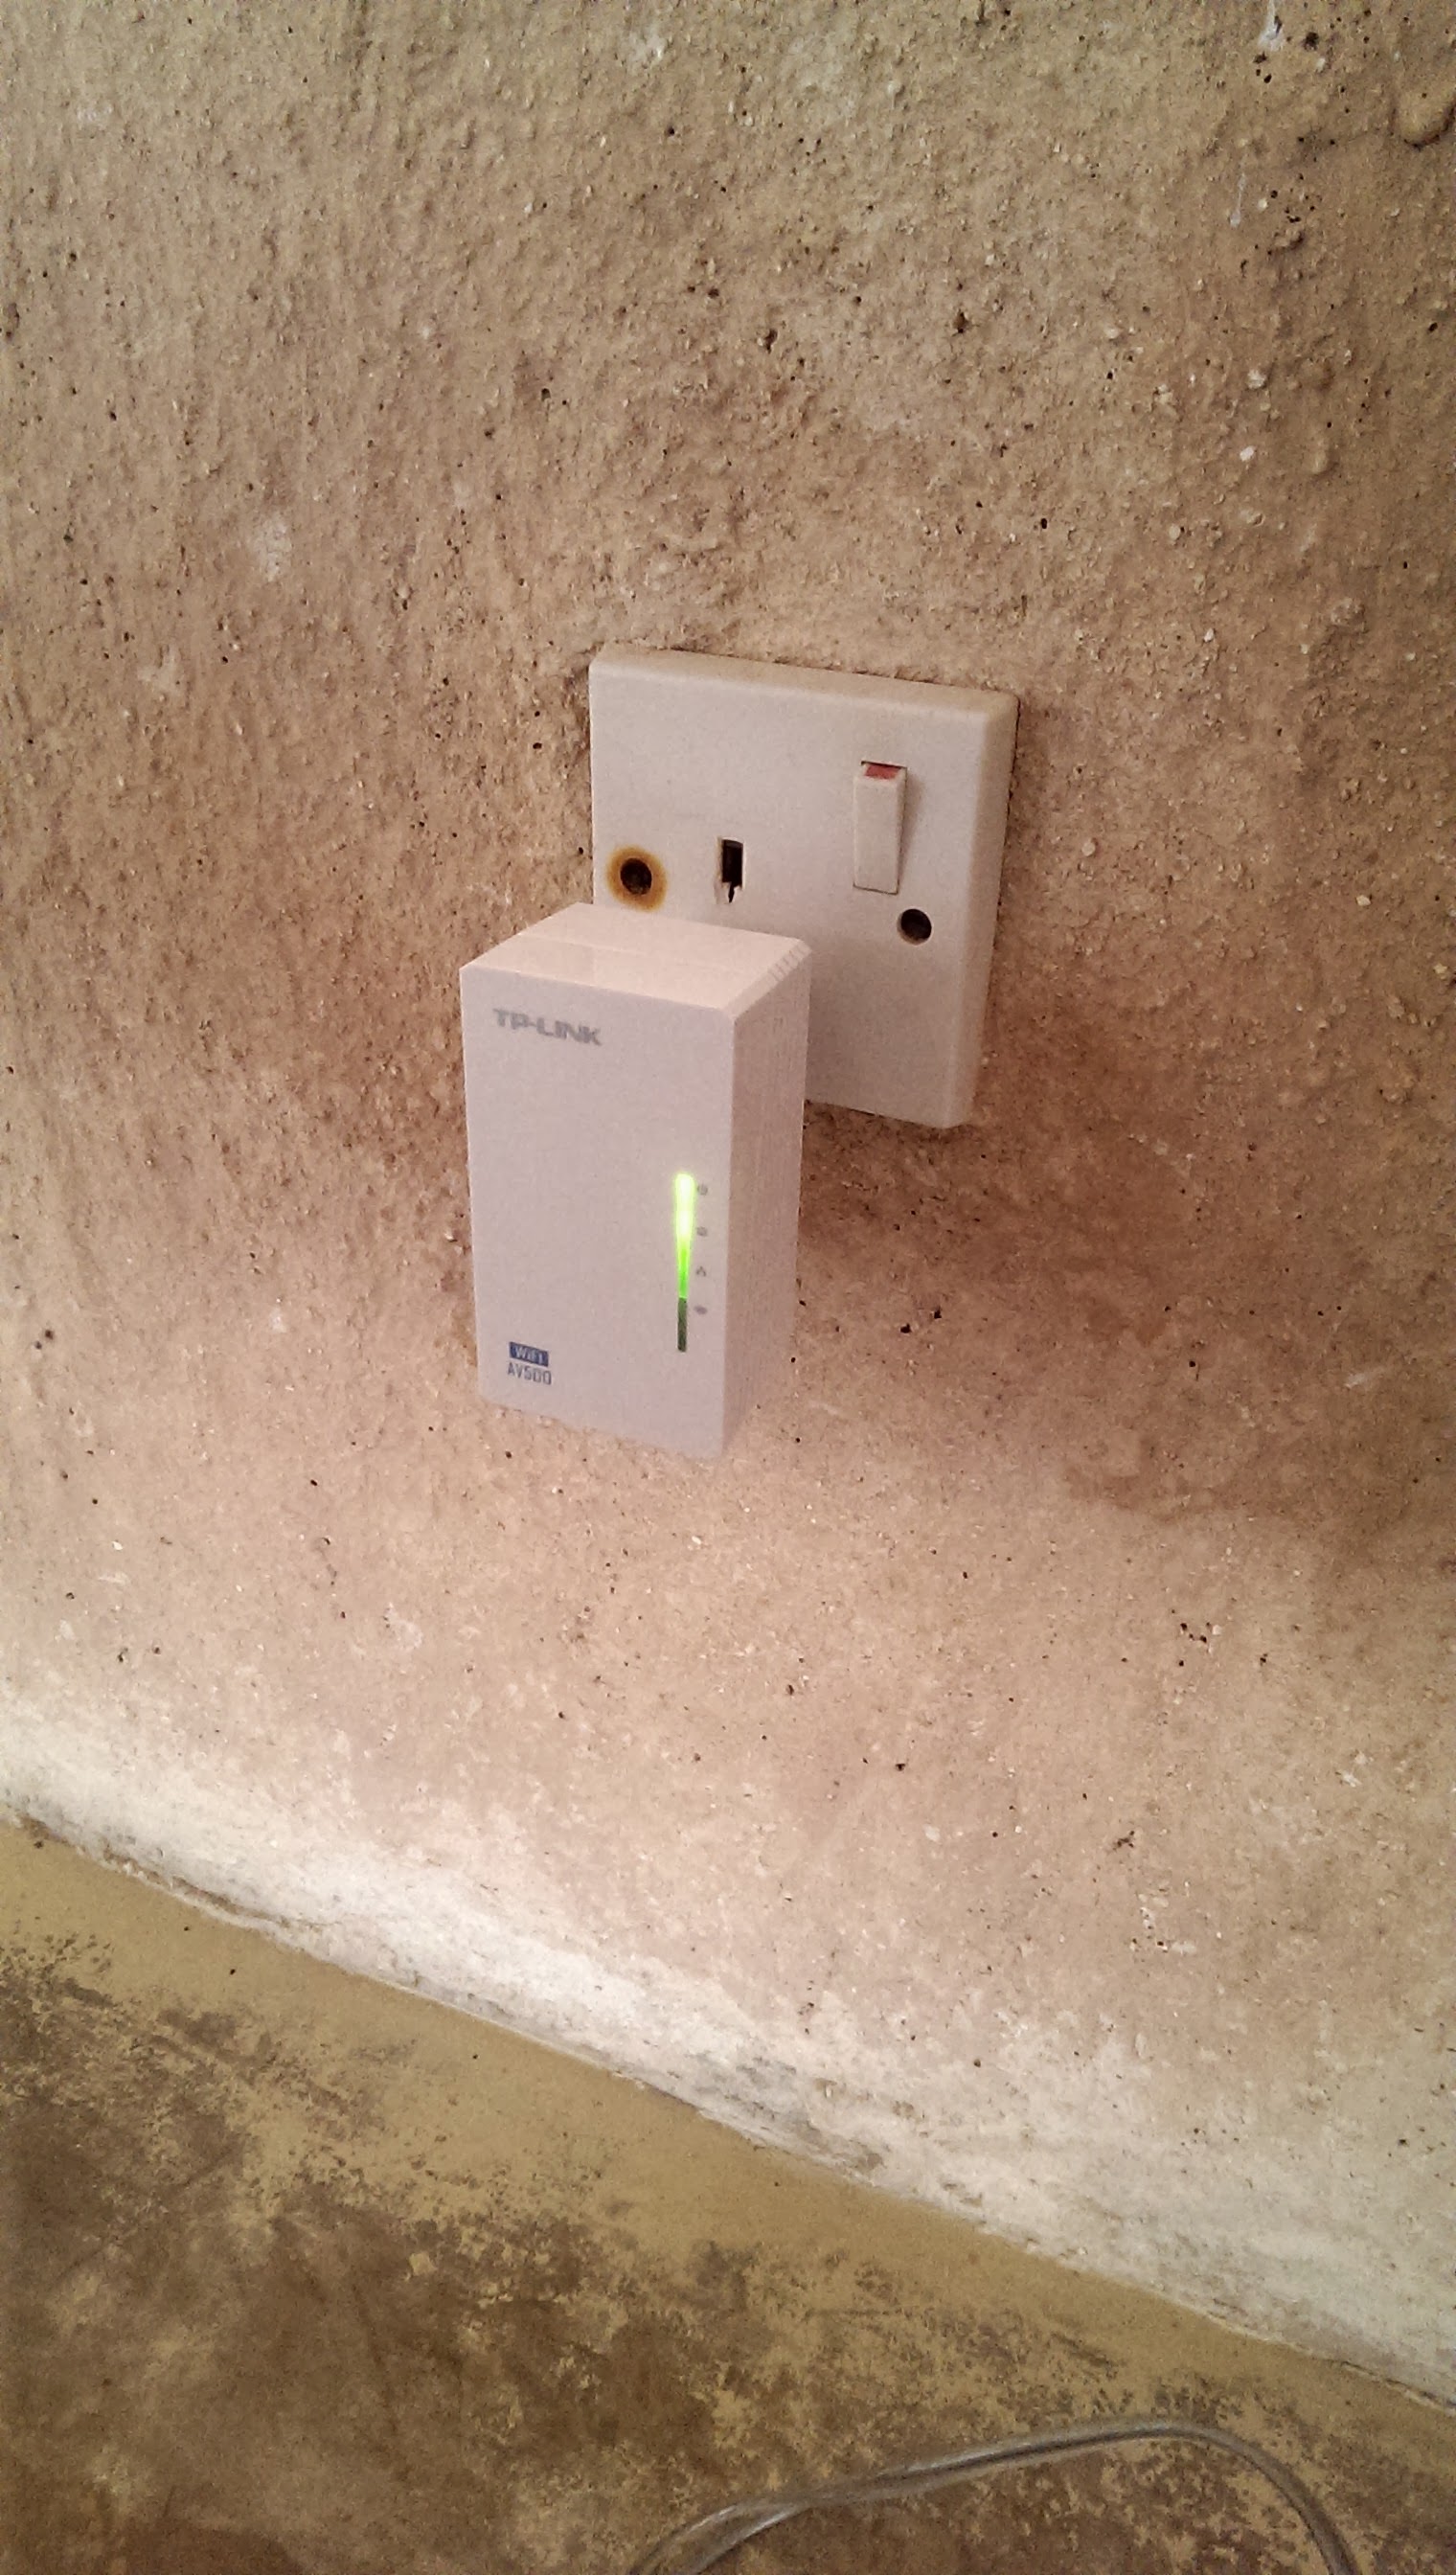 A Power-to-ethernet/Wifi adapter at Hackerbeach last year